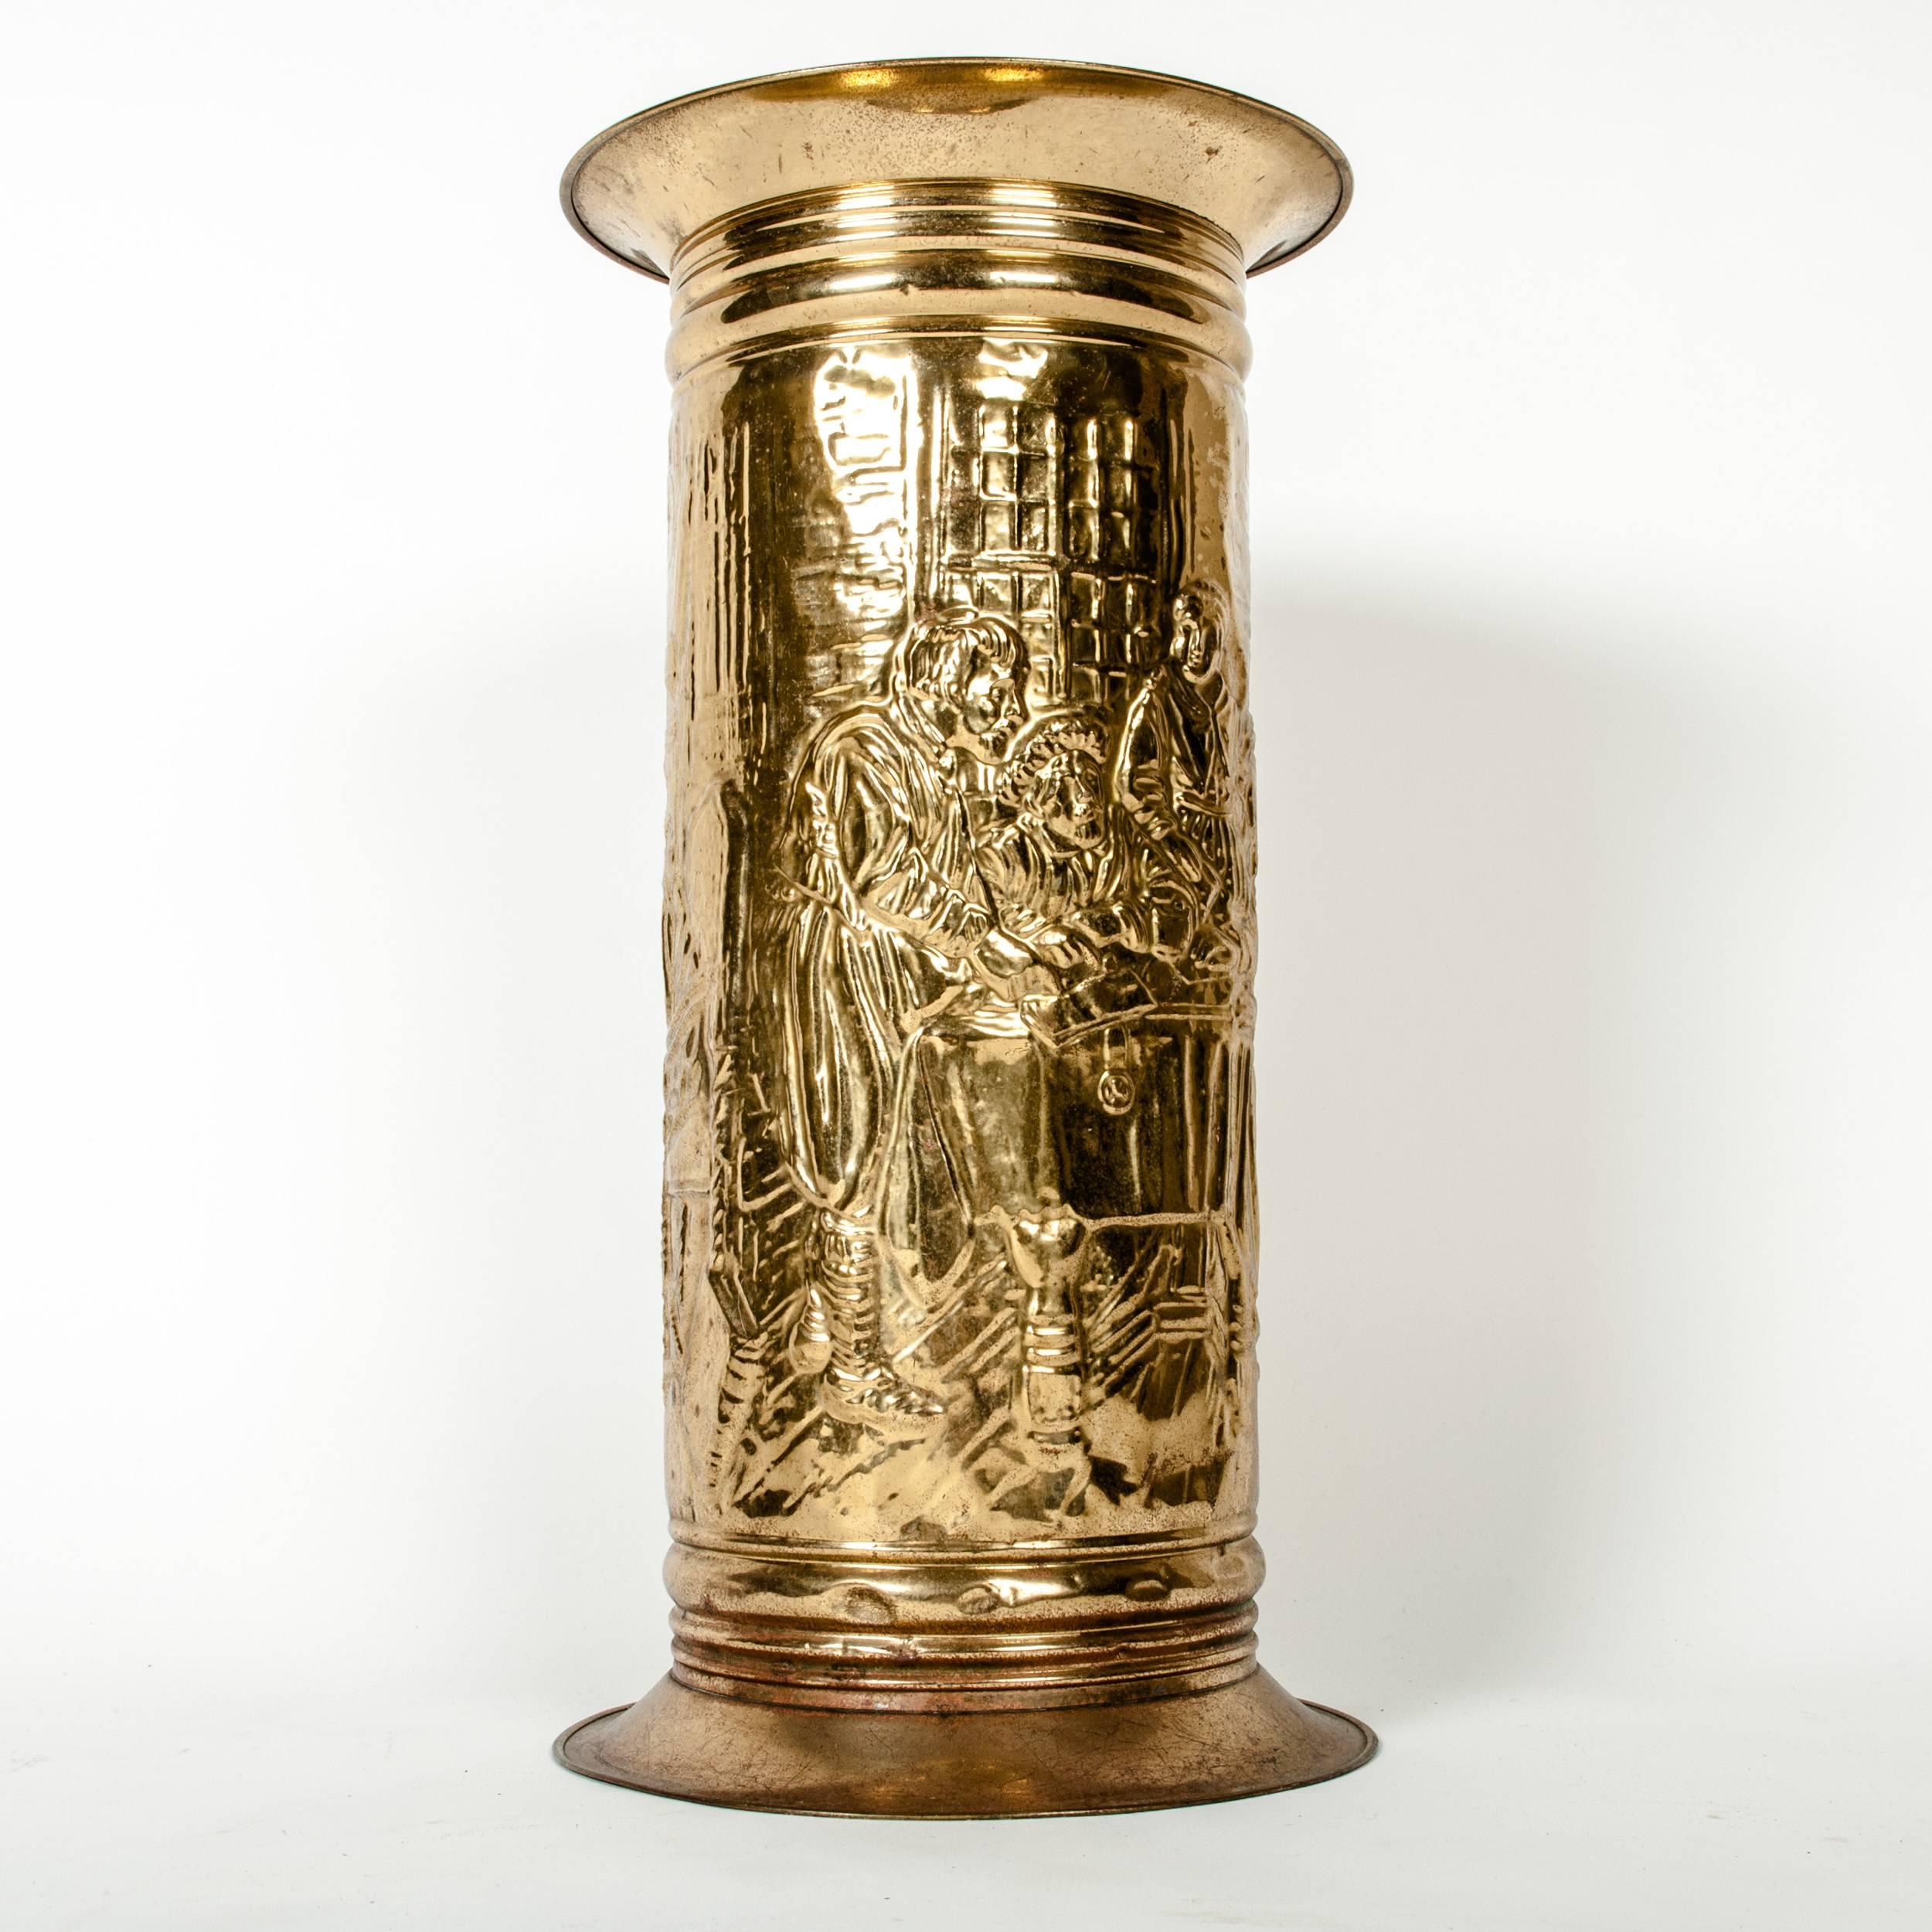 Vintage brass umbrella stand. The umbrella stand measure 19 inches high x 10 inches diameter.